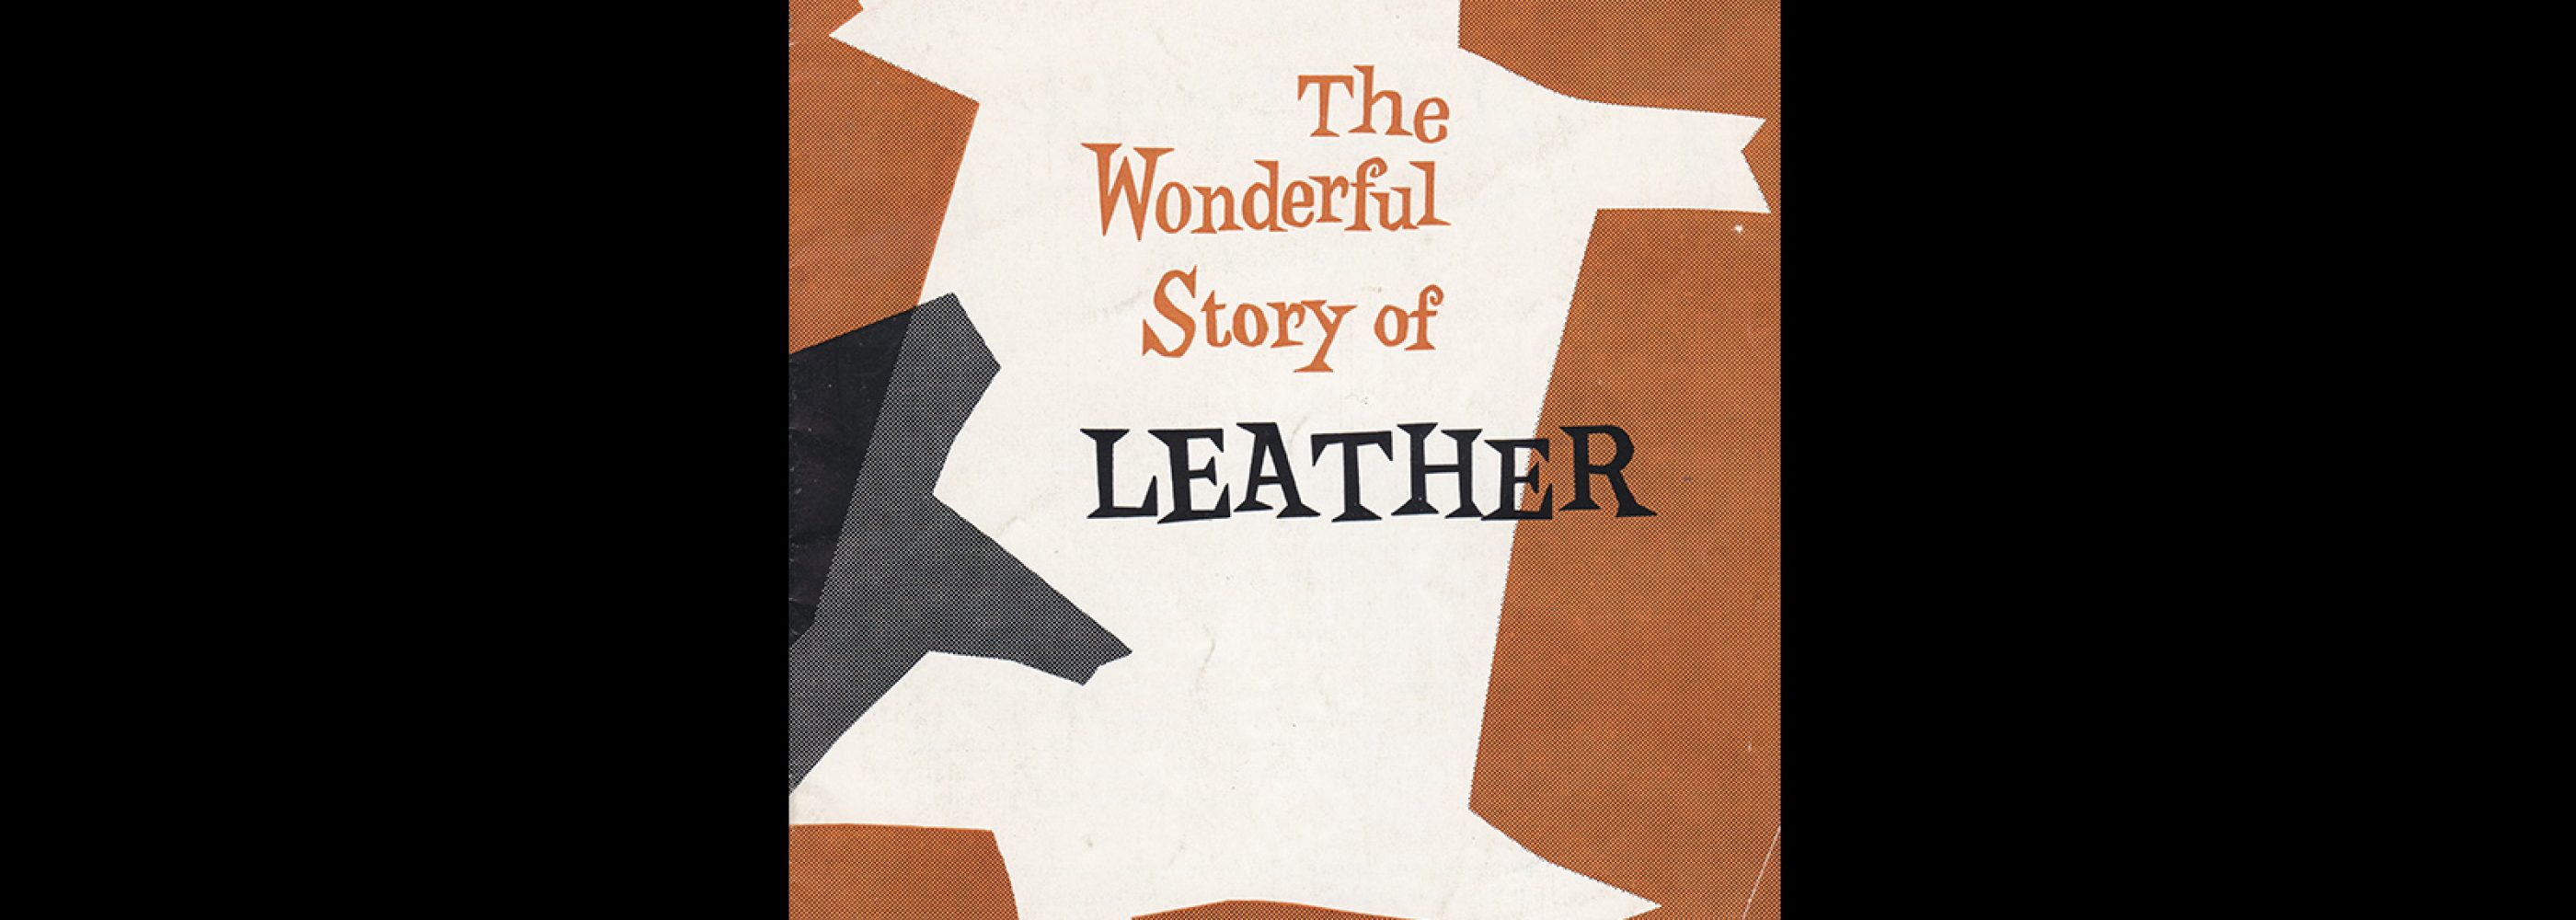 The Wonderful Story of Leather, 1960s